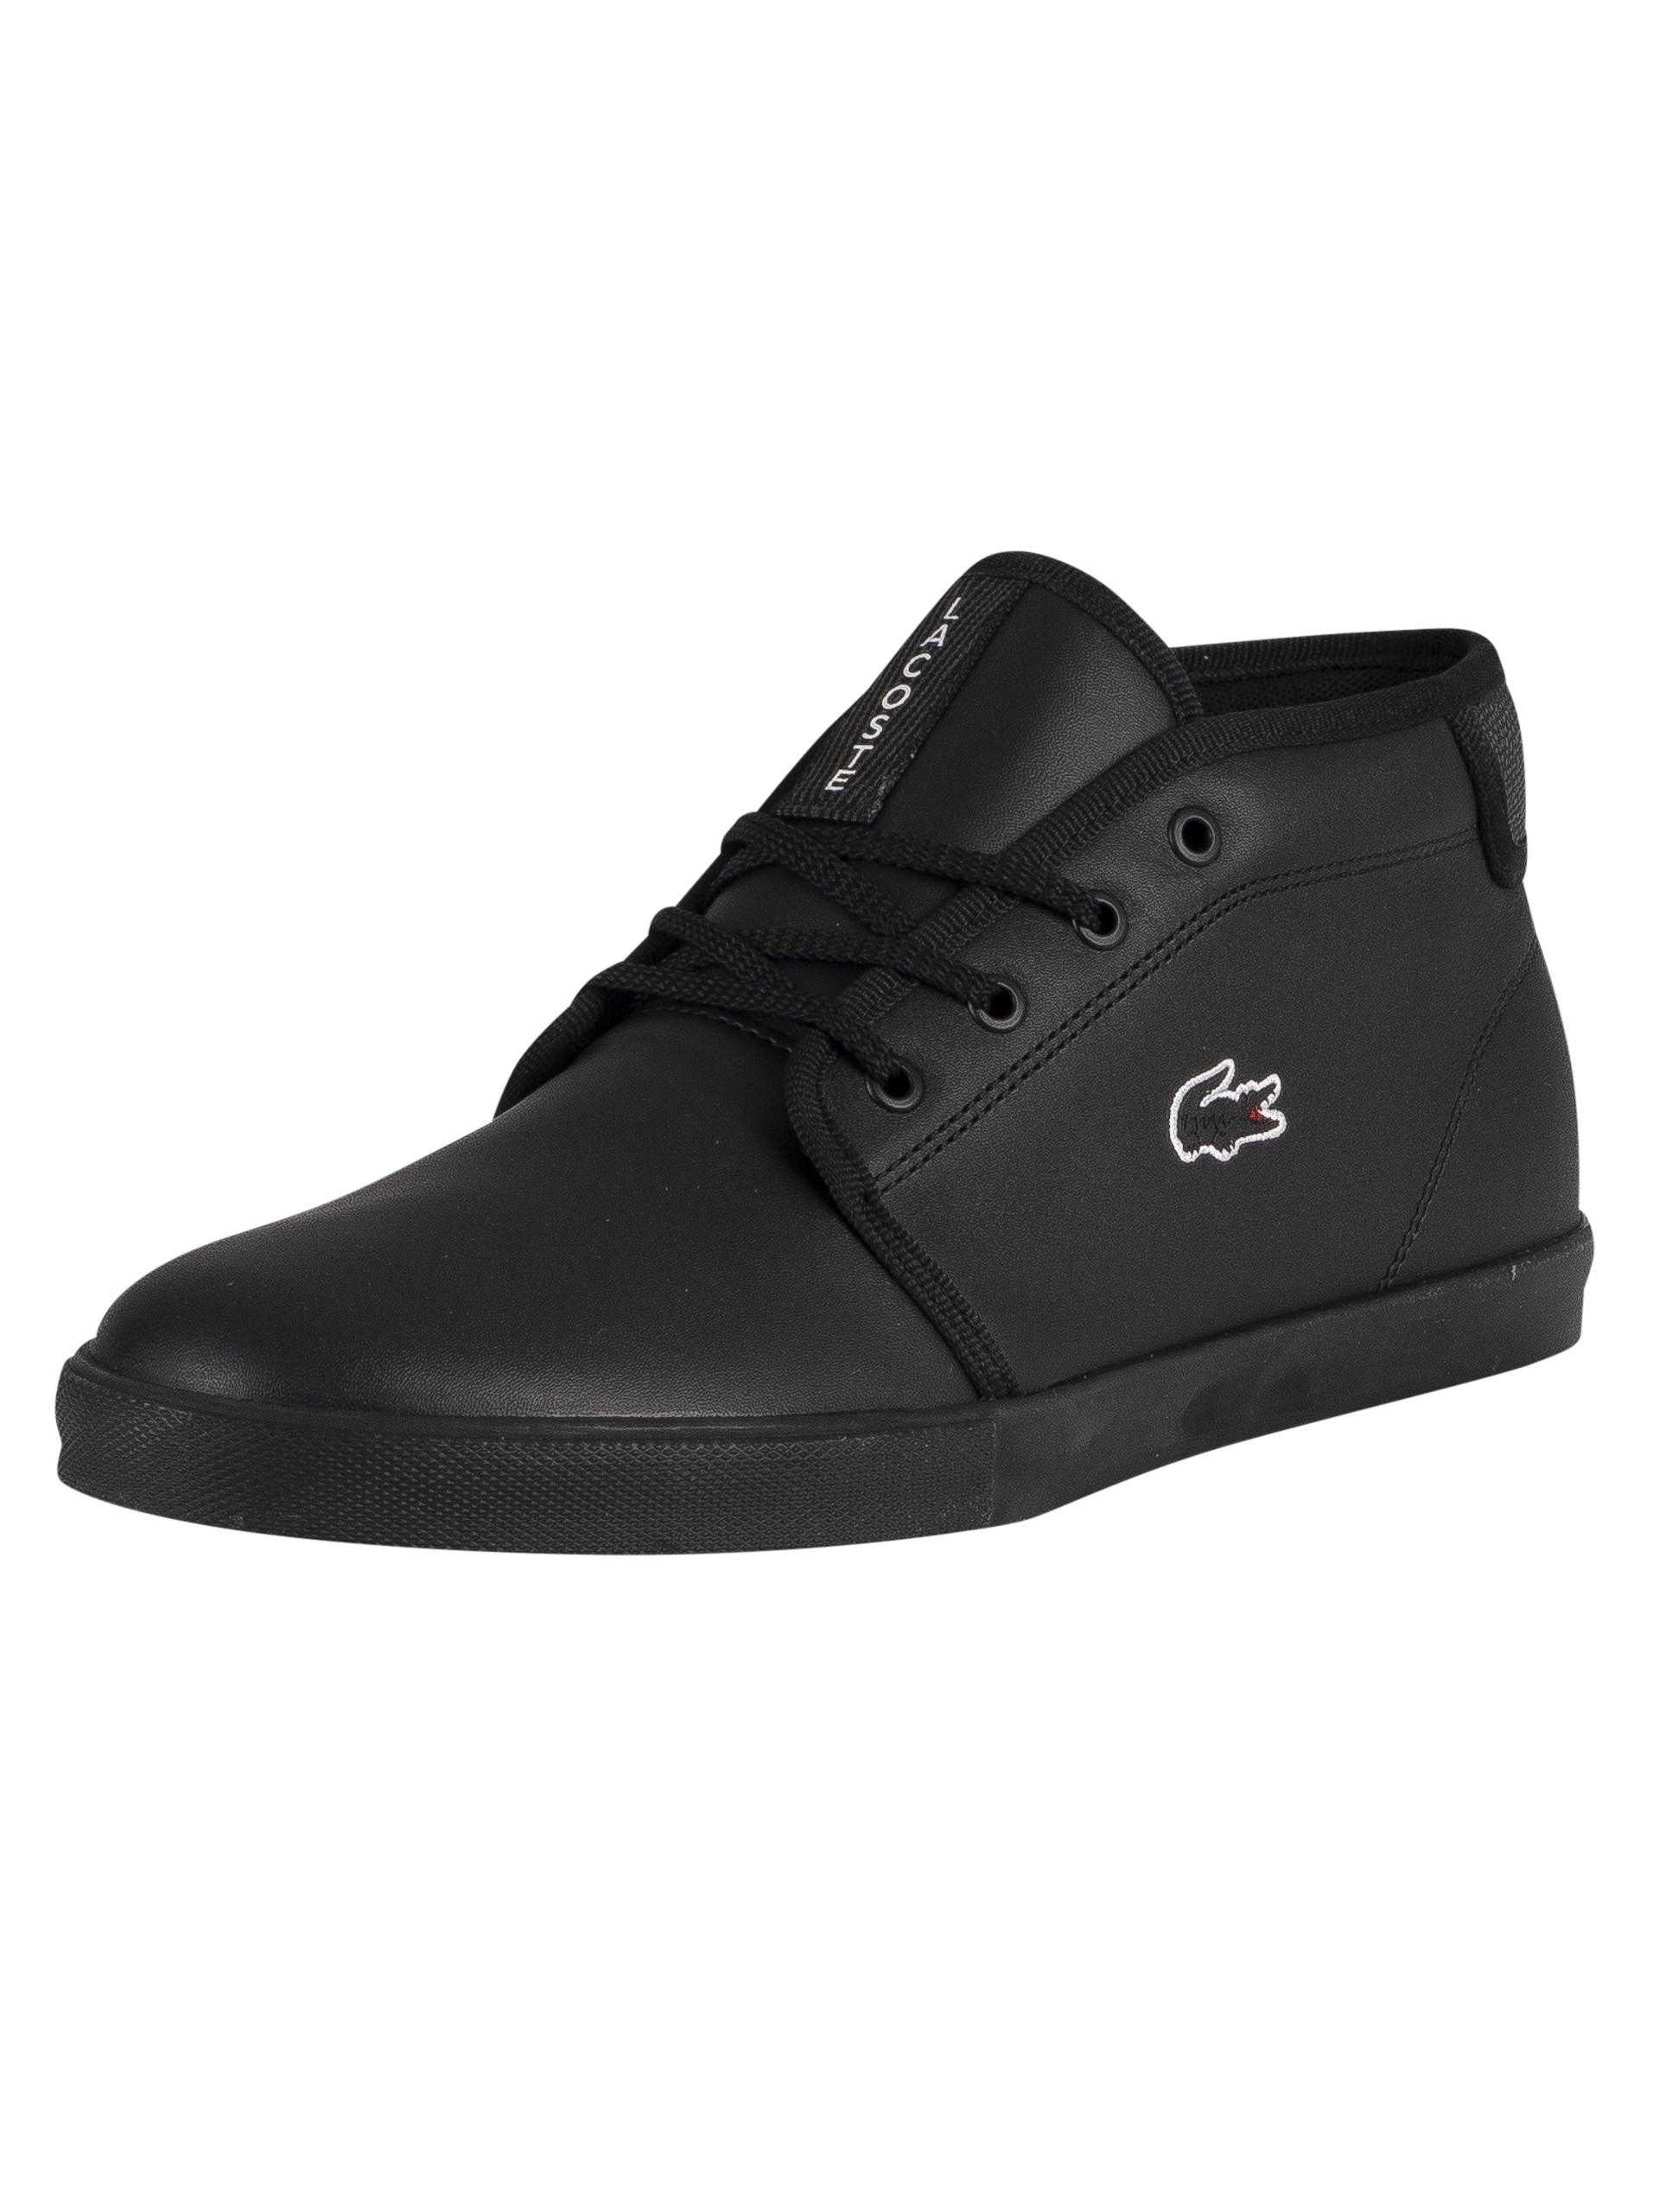 lacoste ampthill black leather - 51 